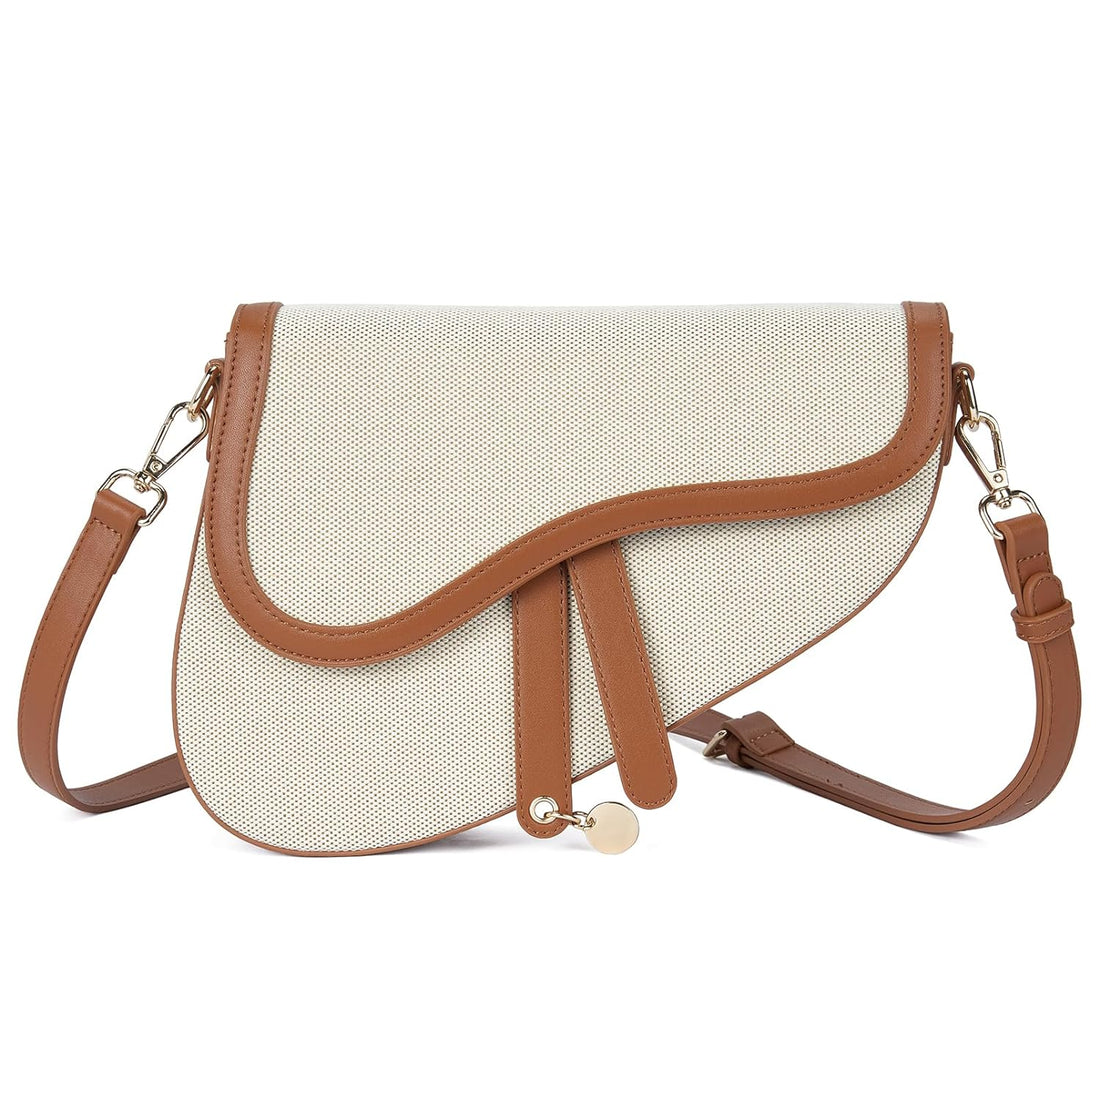 Telena Small Saddle Purse, Trendy Cross body Bag Leather Shoulder Bag for Women with Adjustable Strap